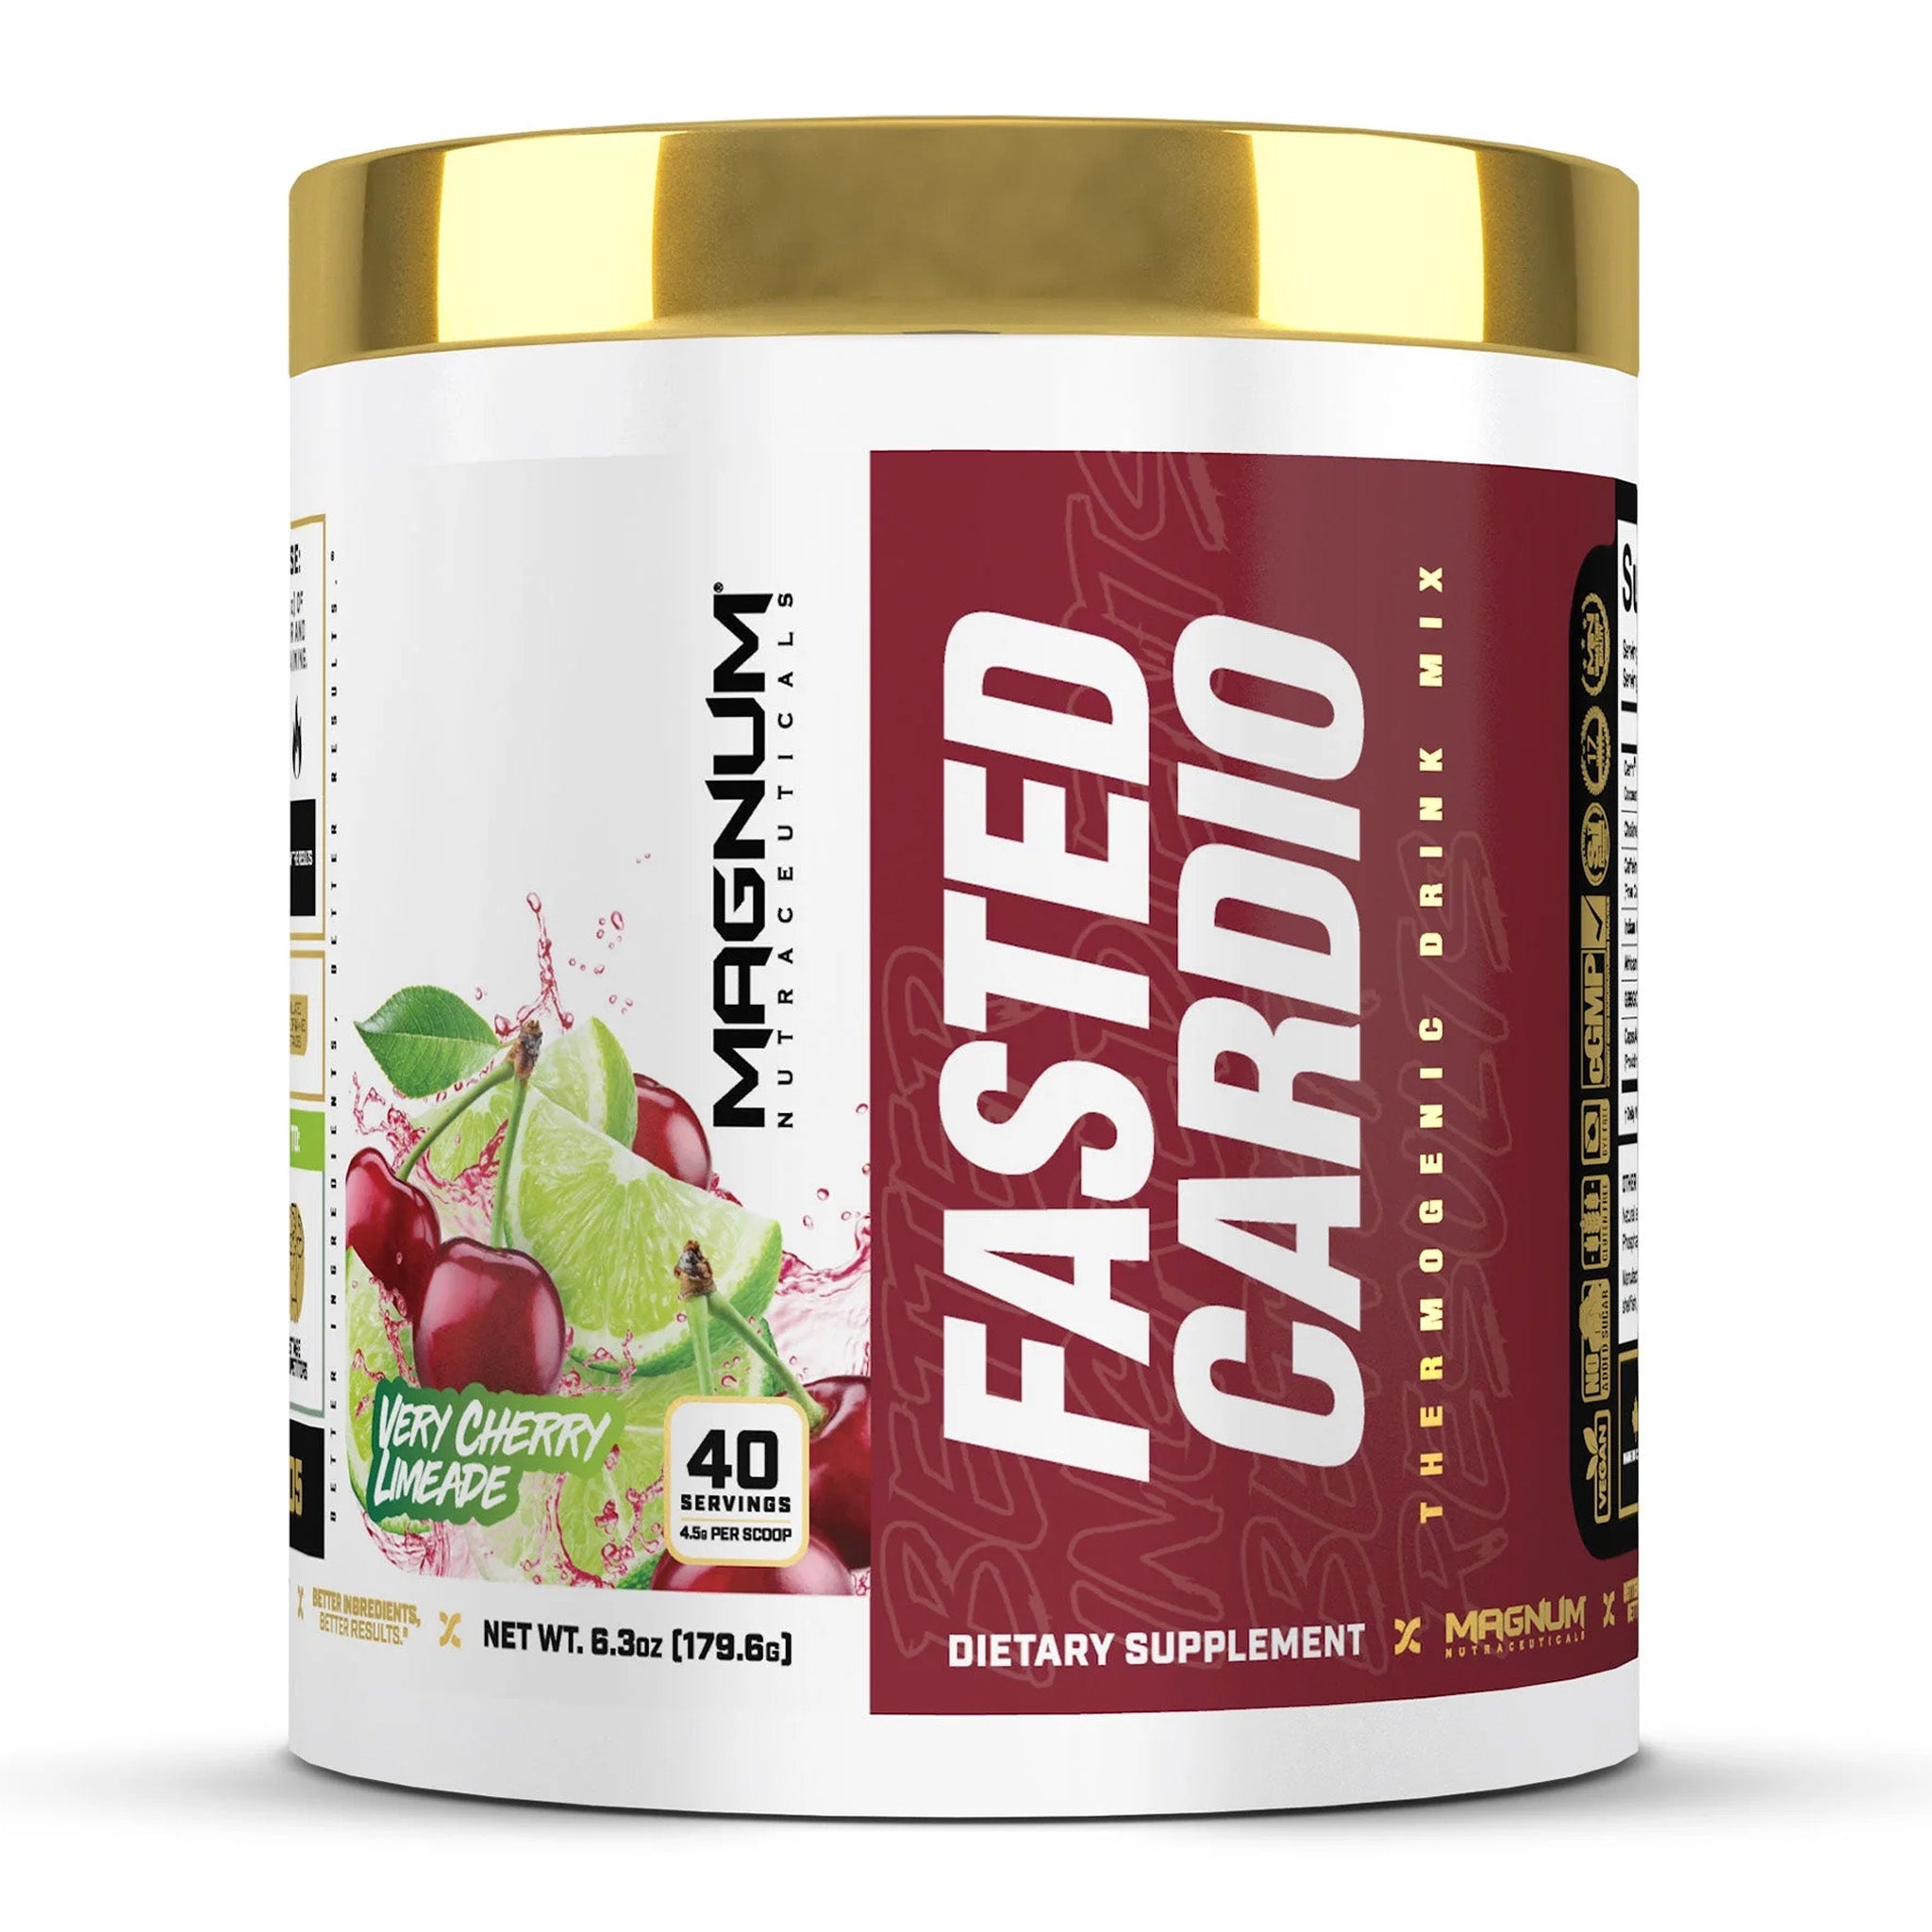 Fasted Cardio (40 Servings)